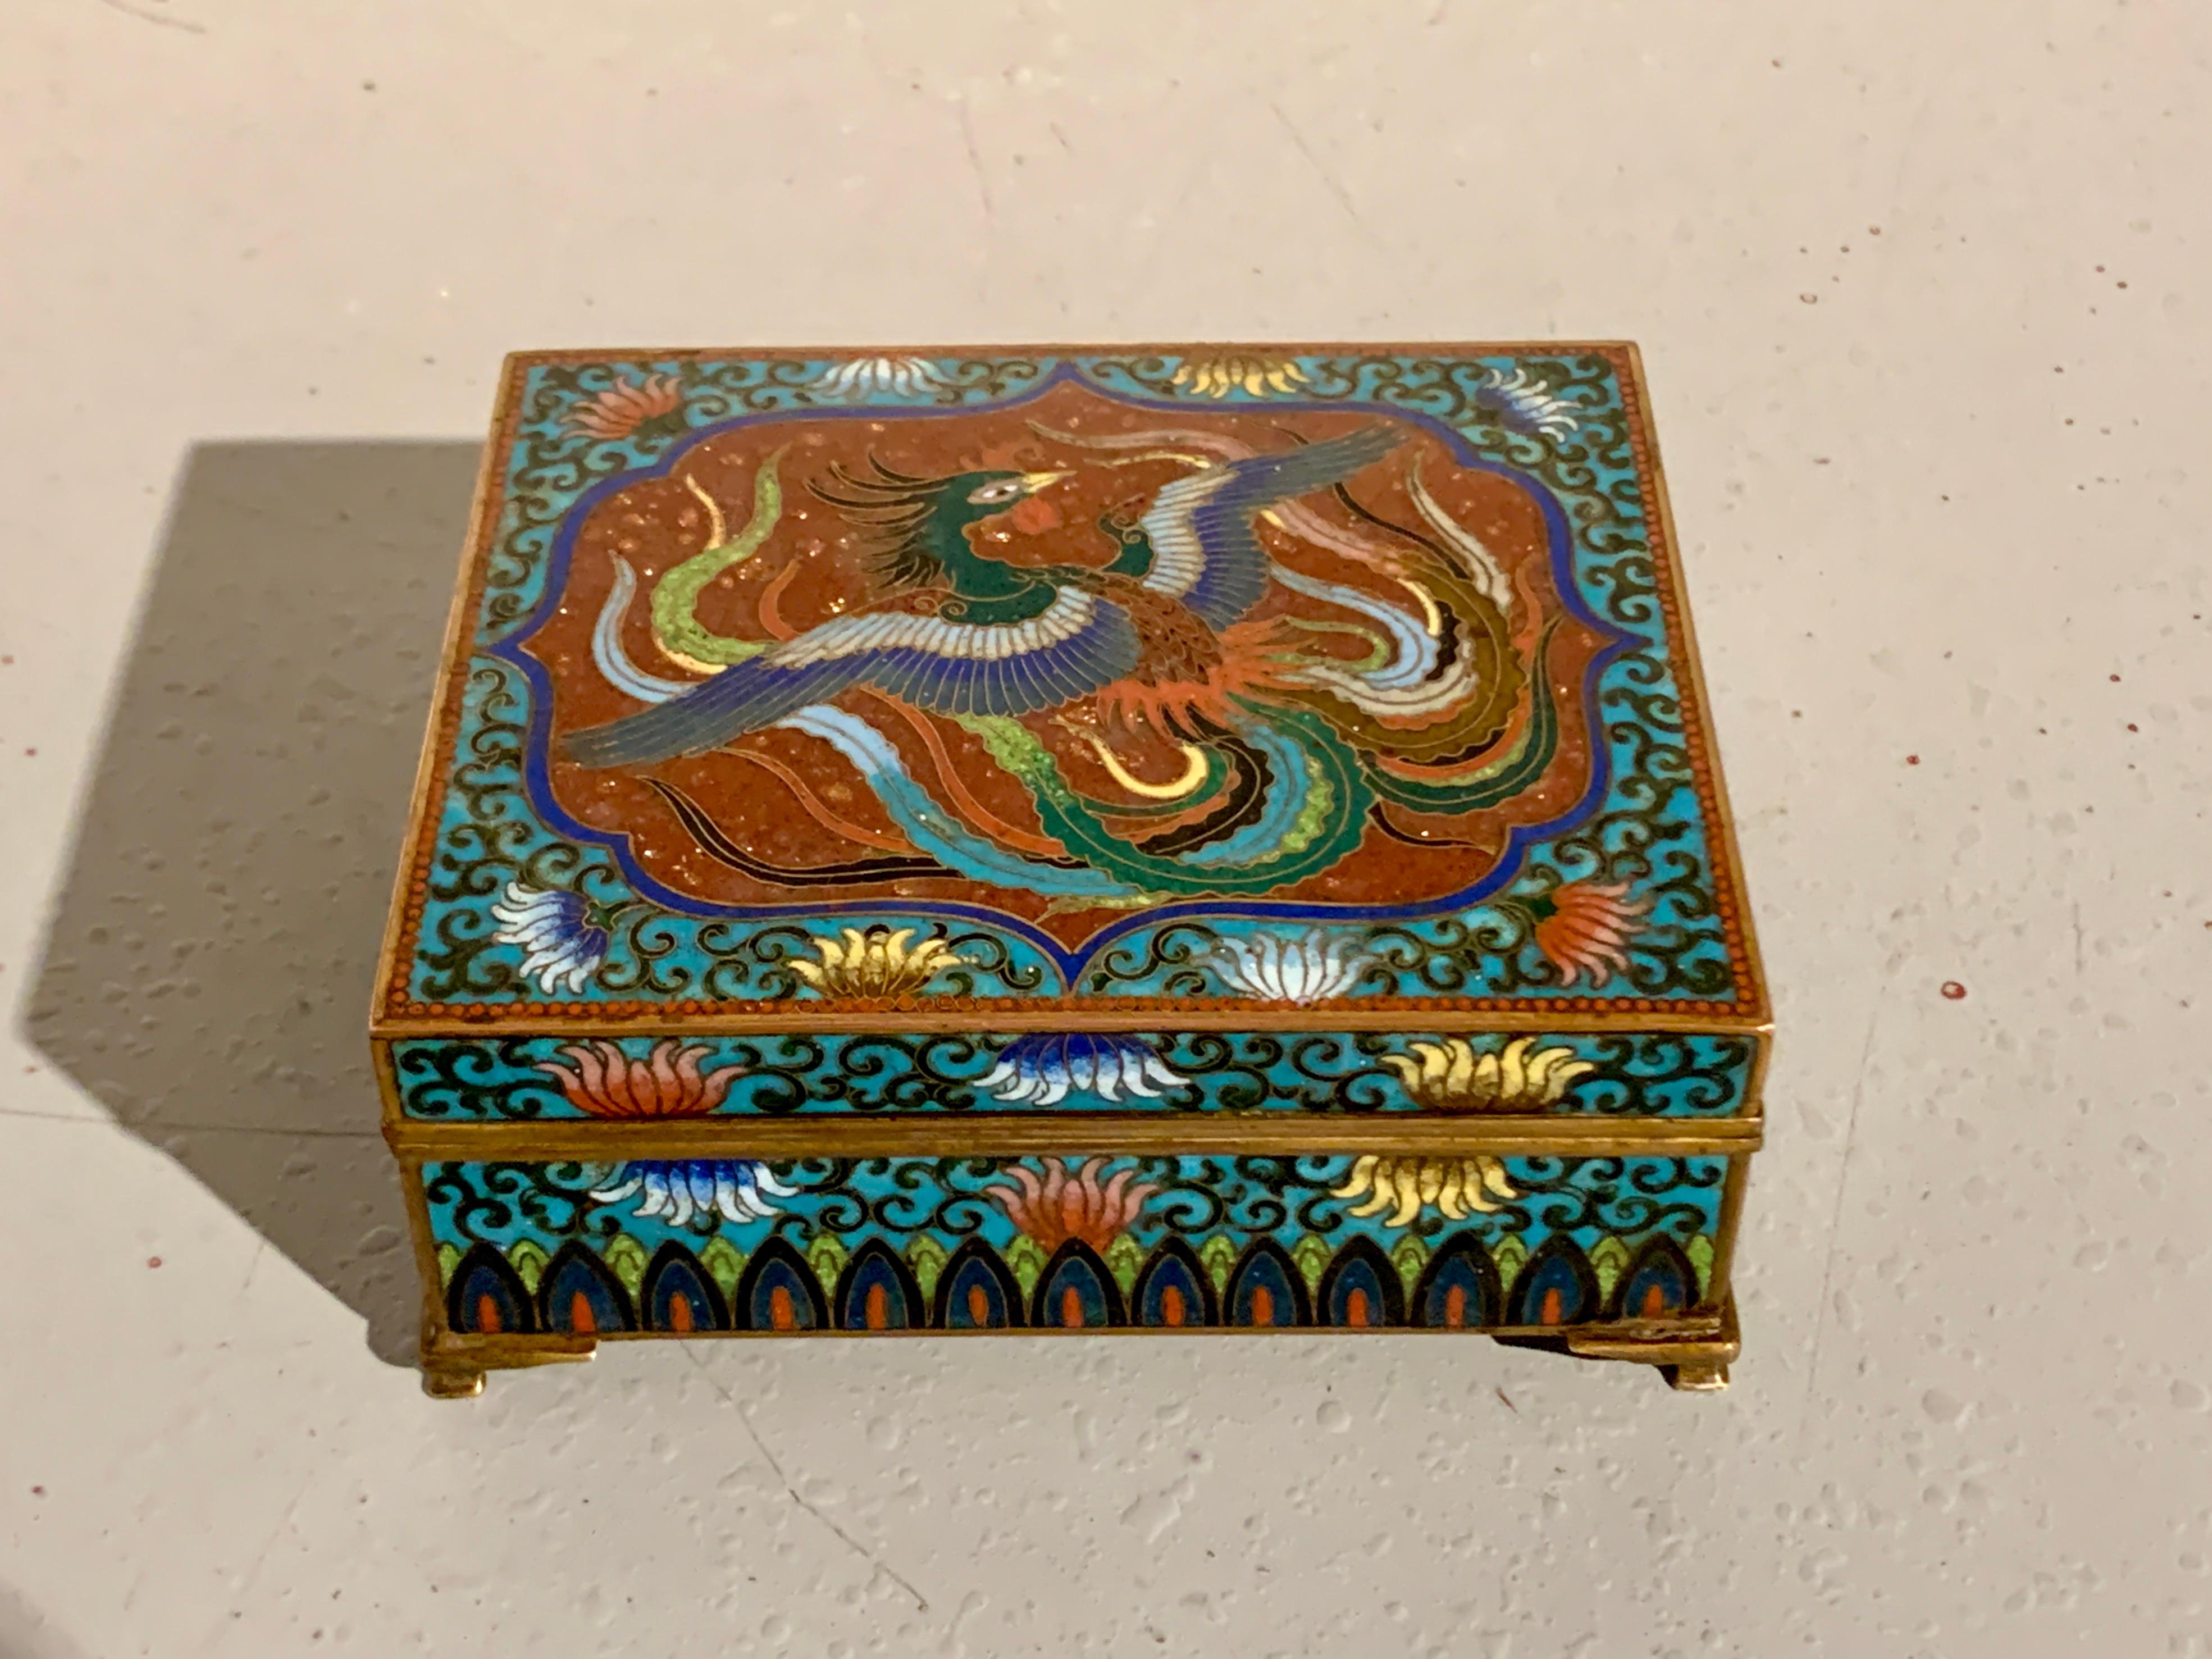 A striking Japanese turquoise ground cloisonne and goldstone trinket or jewelry box, Meiji Period, circa 1900, Japan.

The hinged top box set on raised feet and decorated in a wonderful array of cloisonne enamels. The top of the box features a